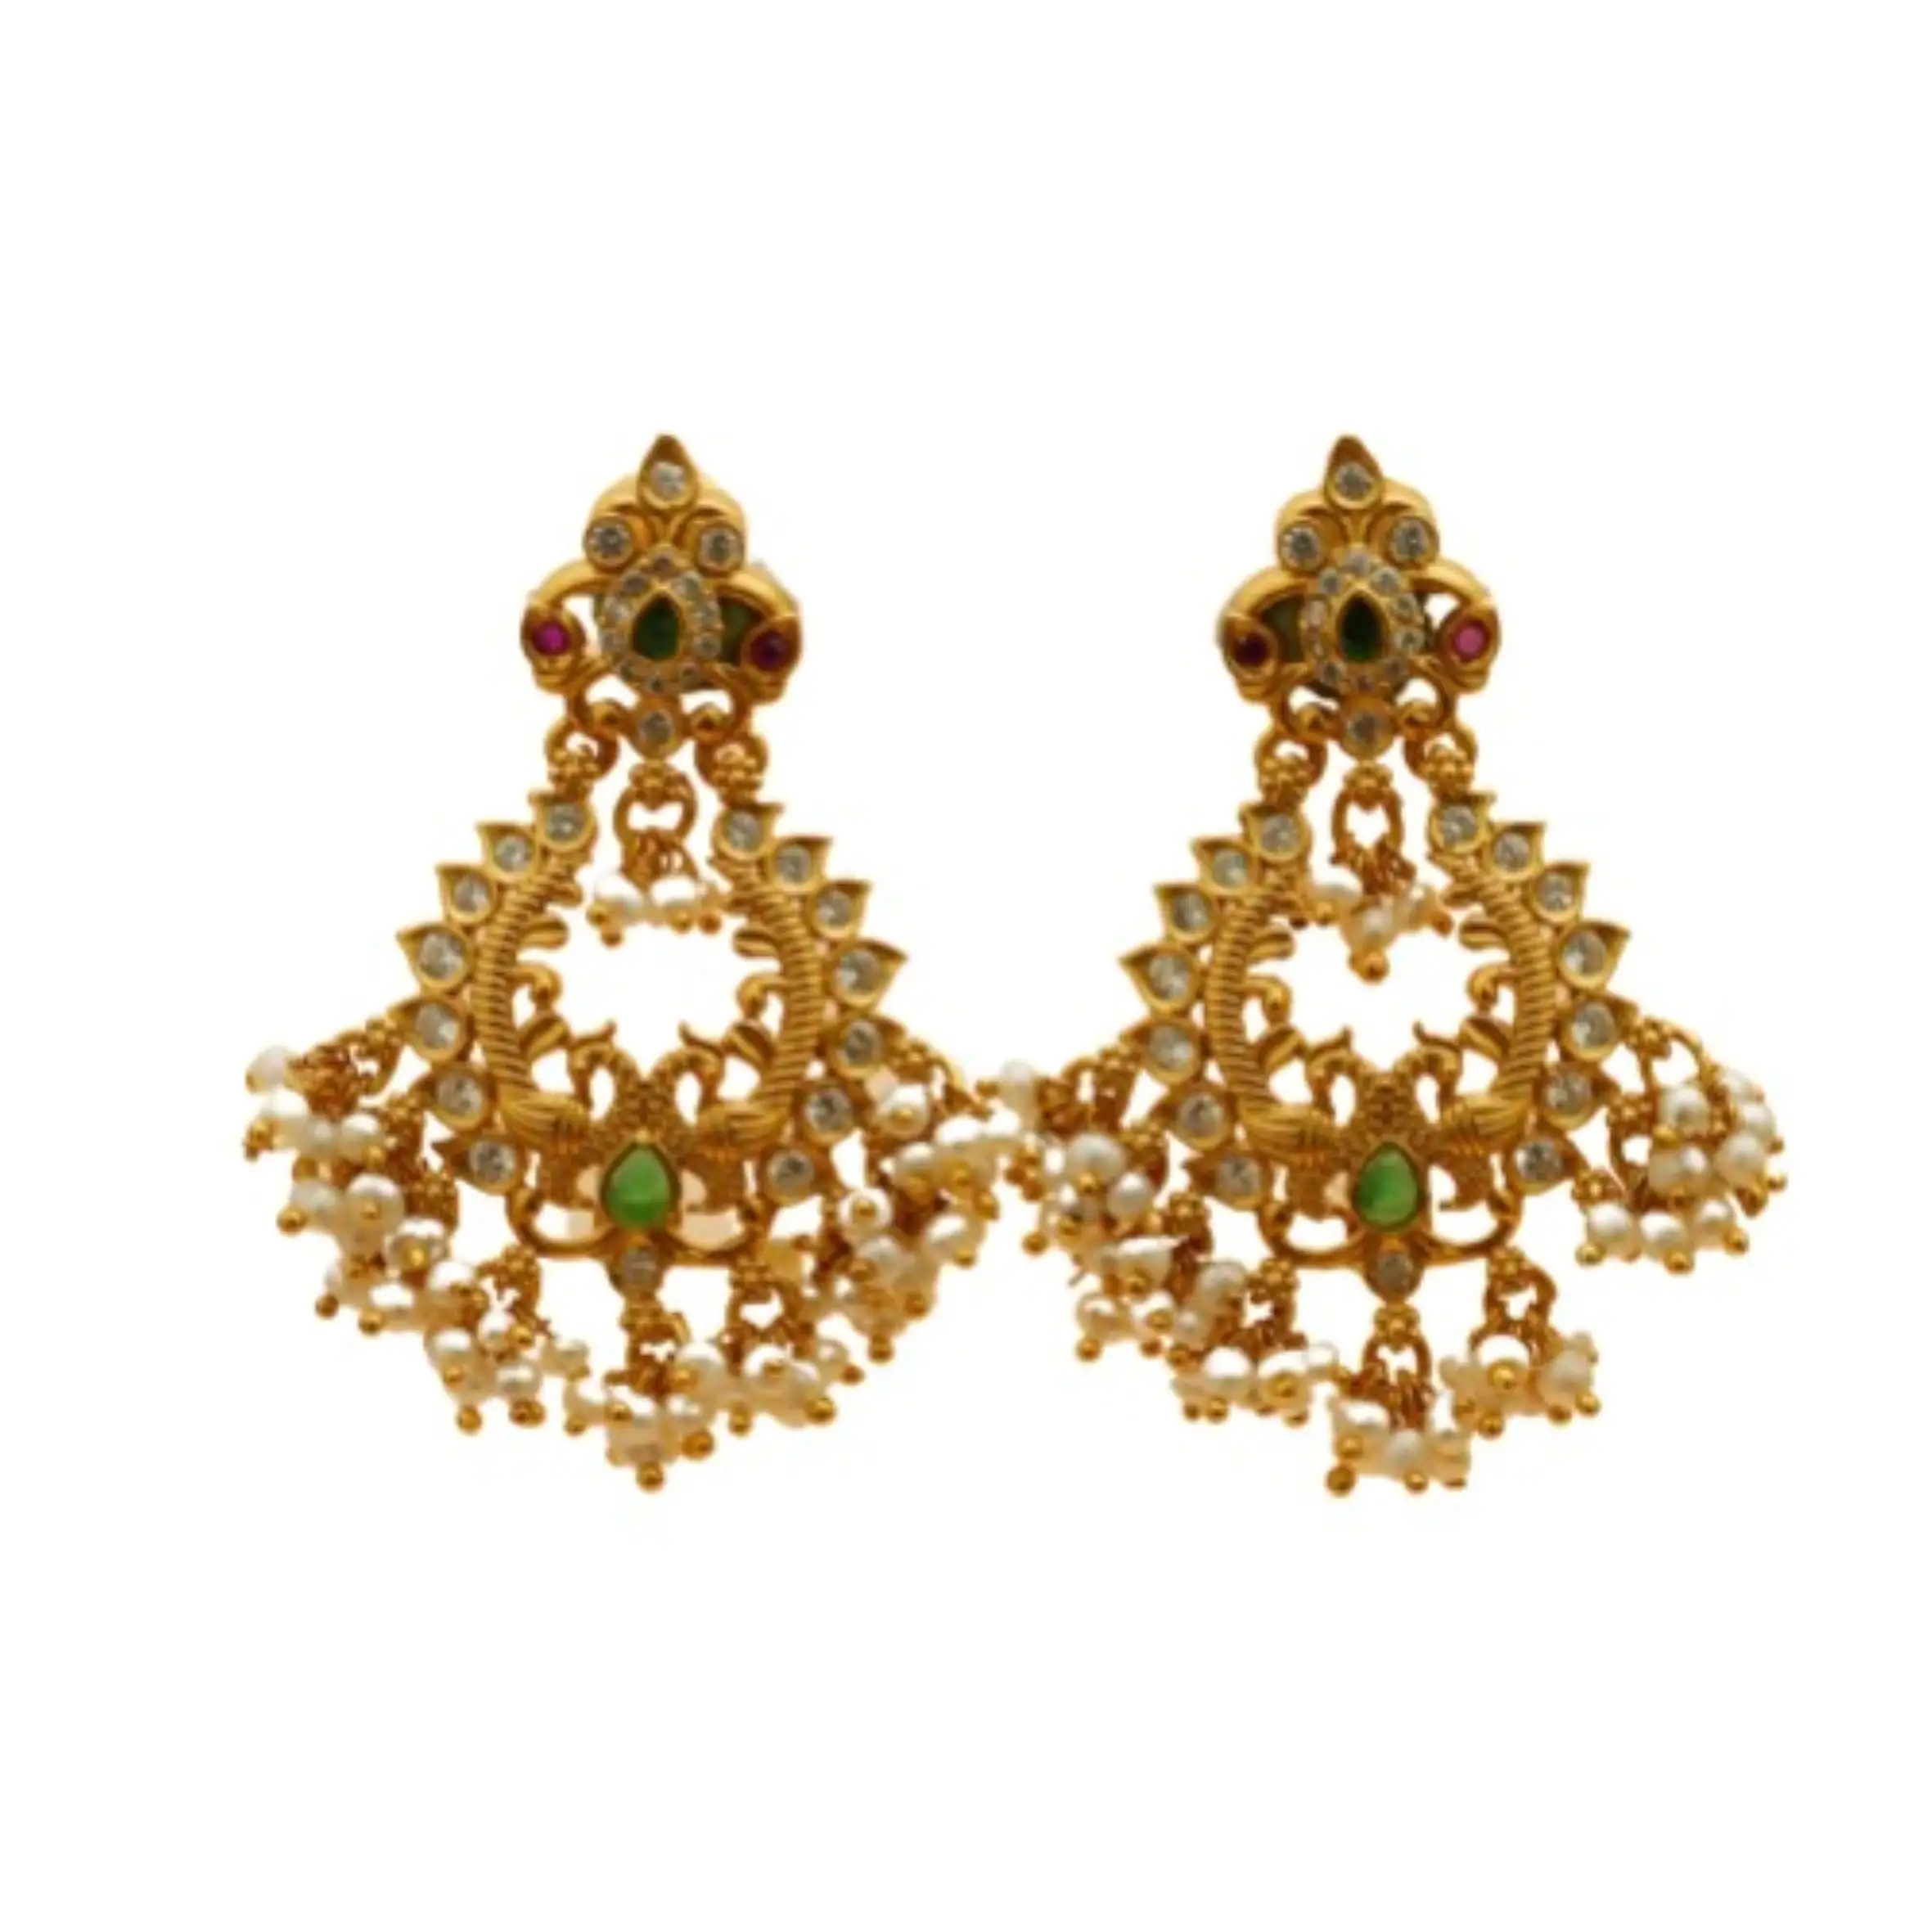 Exquisite Peacock Design 22Karat Gold Tone CZ Emerald Ruby Stone Pearl Cluster Women Dangler Earring on Party Wear at Best Price